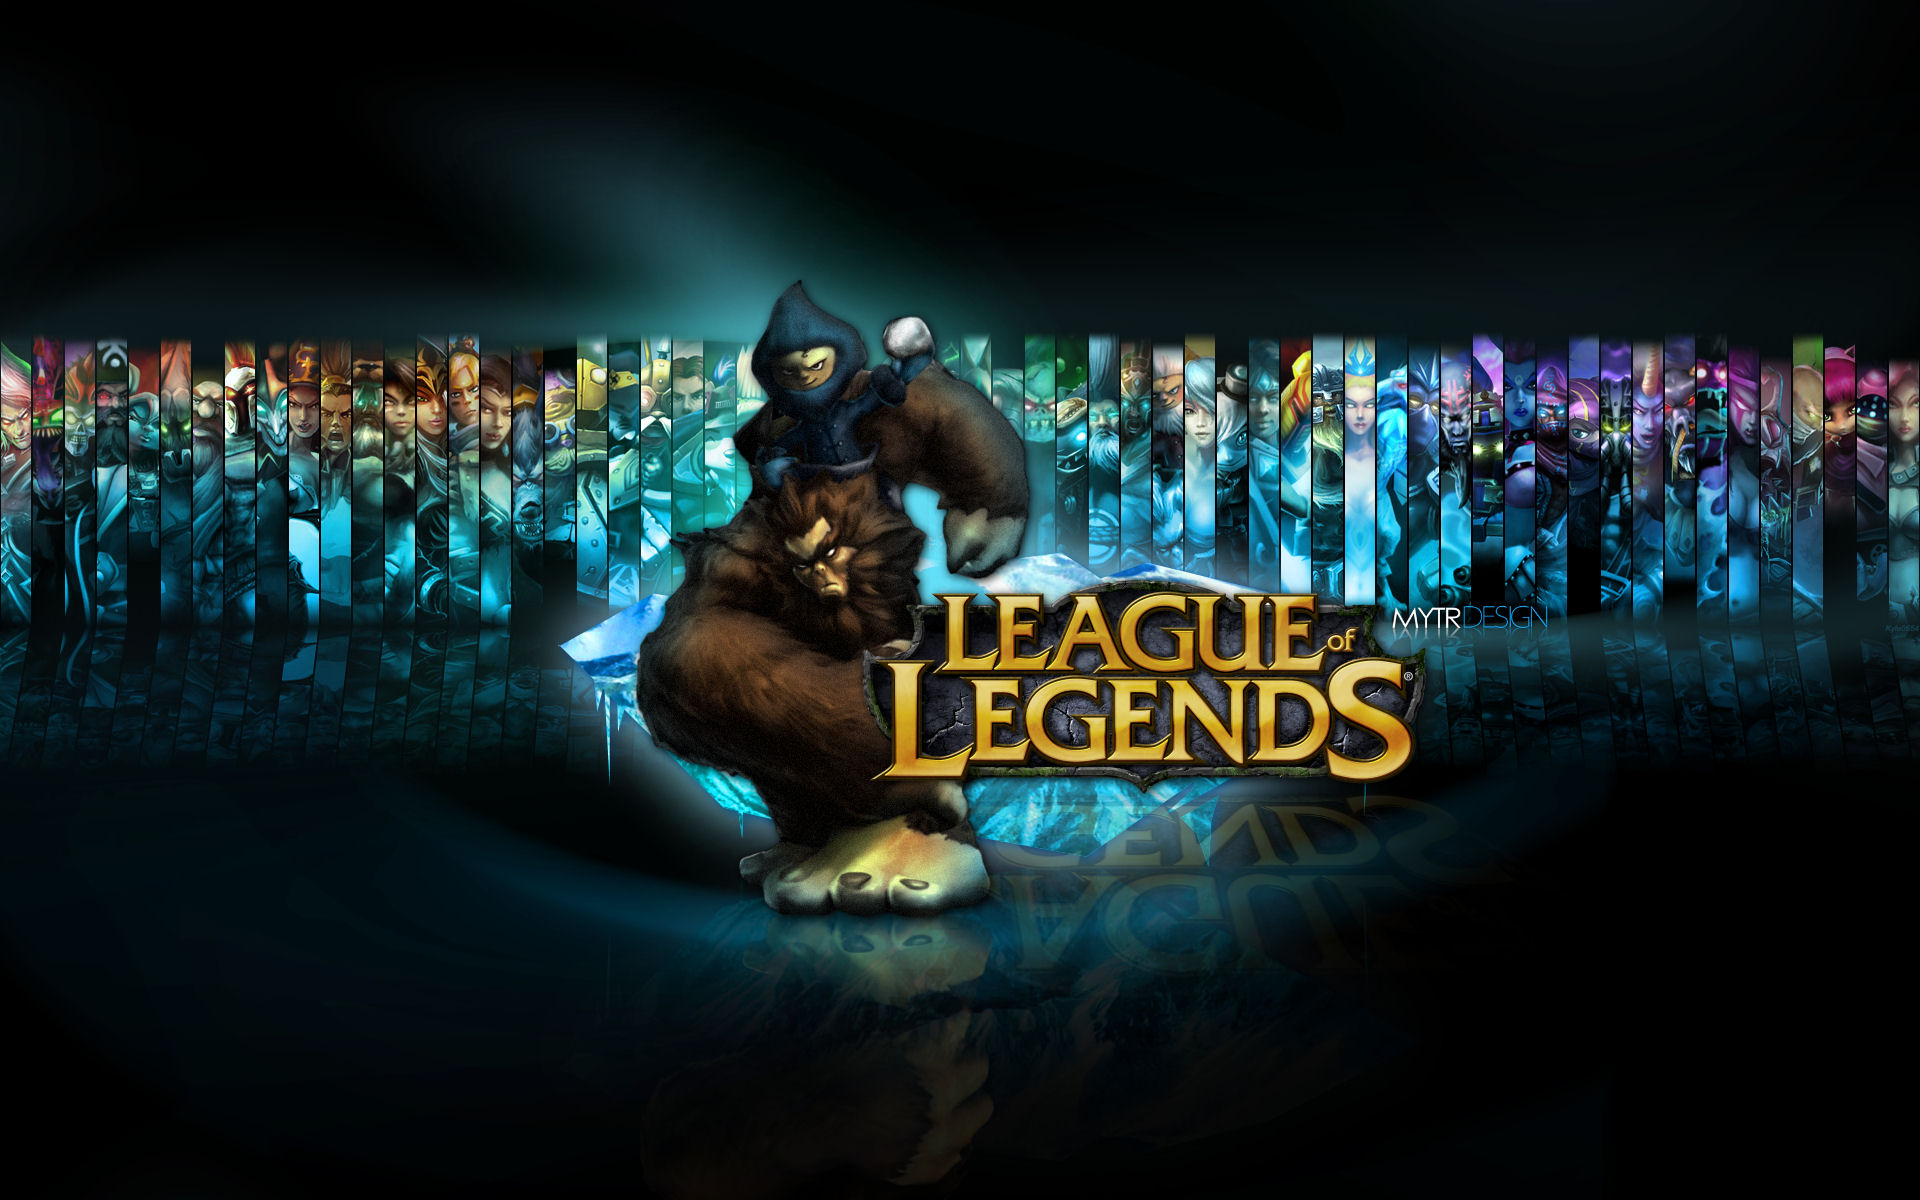 Have A Very Cool Pack Of HD Lol Wallpaper For League Legends